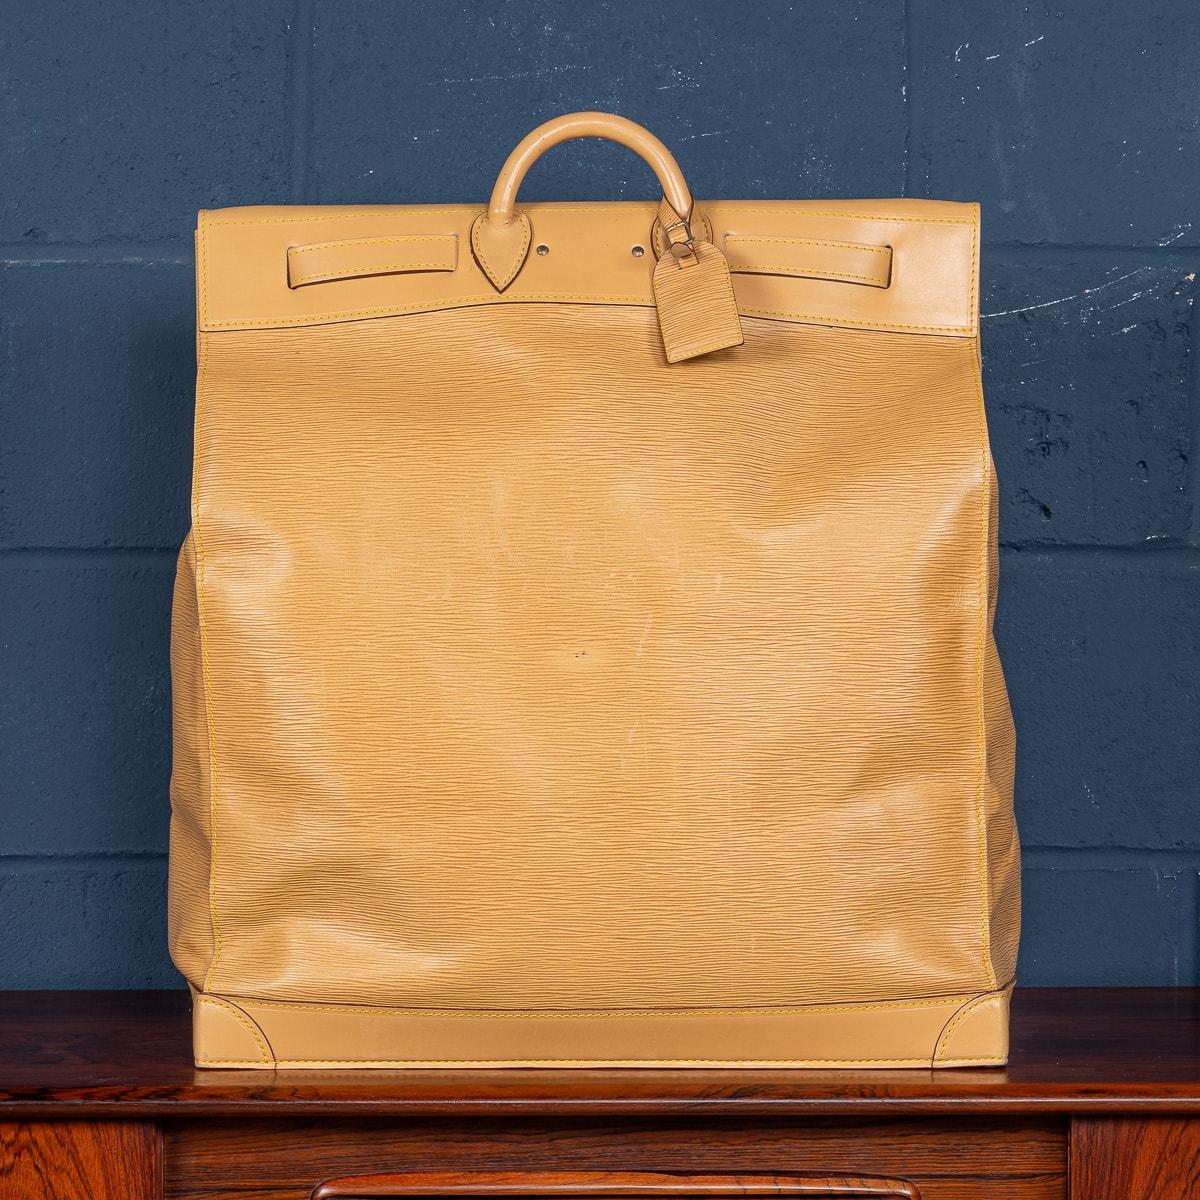 Late 20th Century 20th Century Louis Vuitton Steamer Bag In Epi Leather Canvas, Made In France For Sale